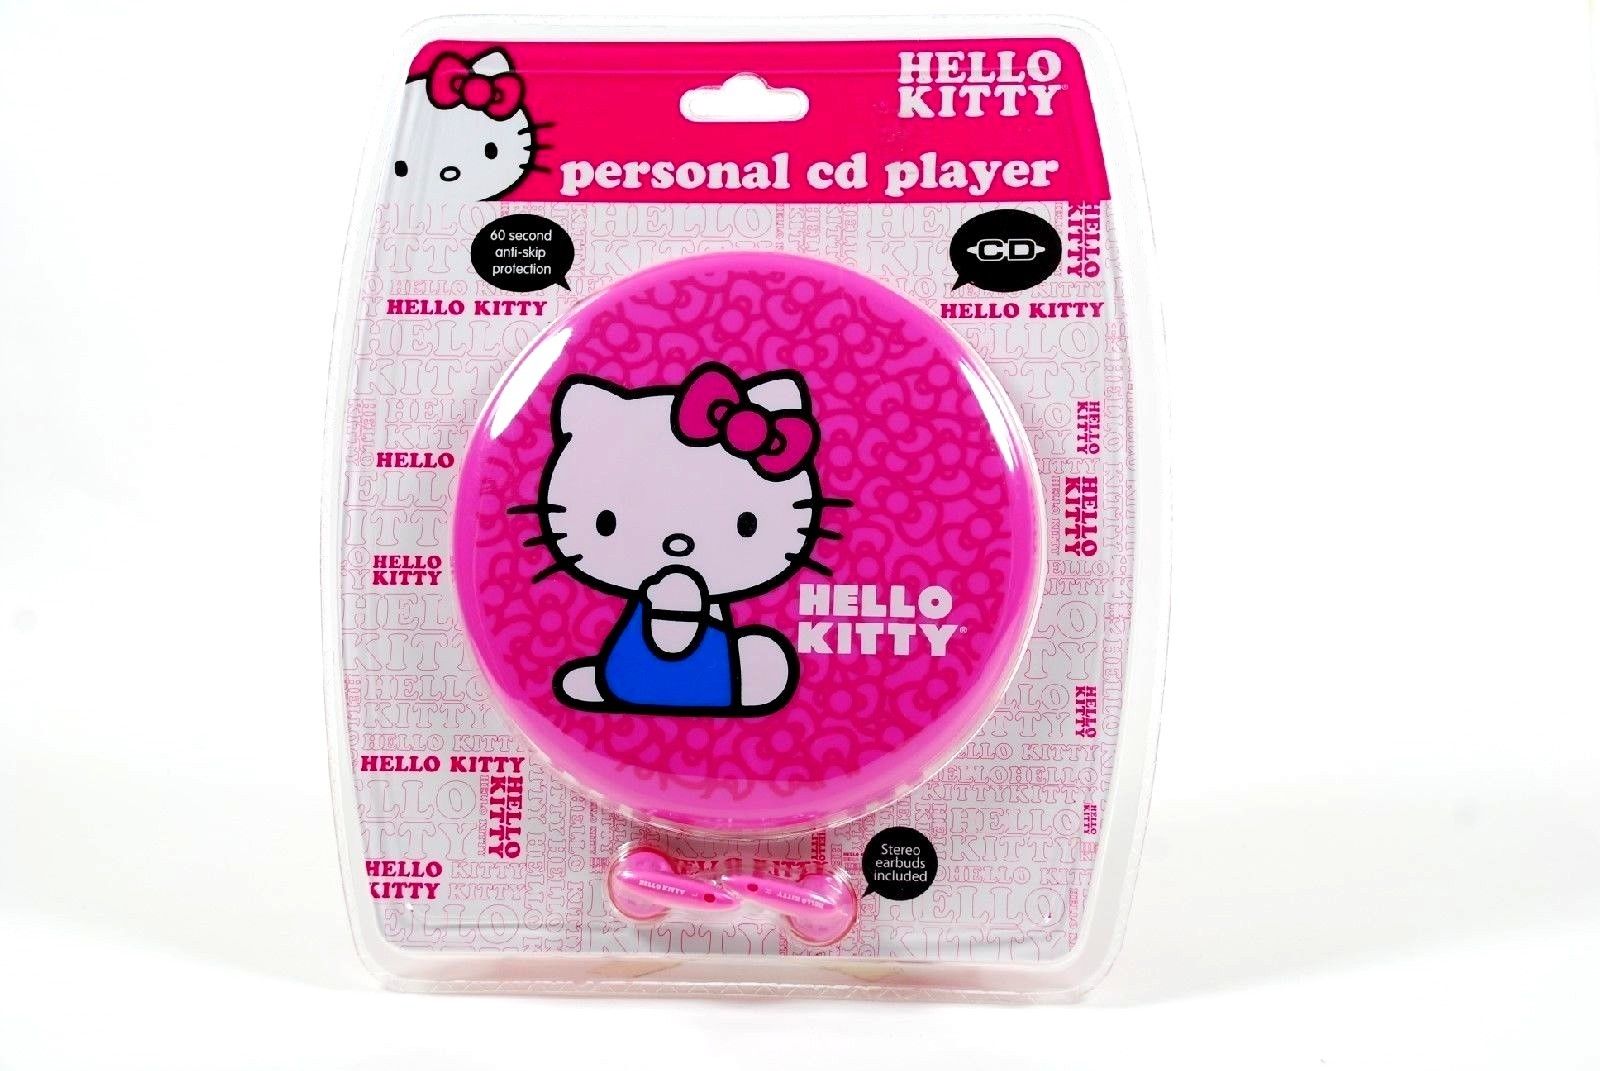 New This Week: Let's Say Hello Kitty While We Build Your Style - Global